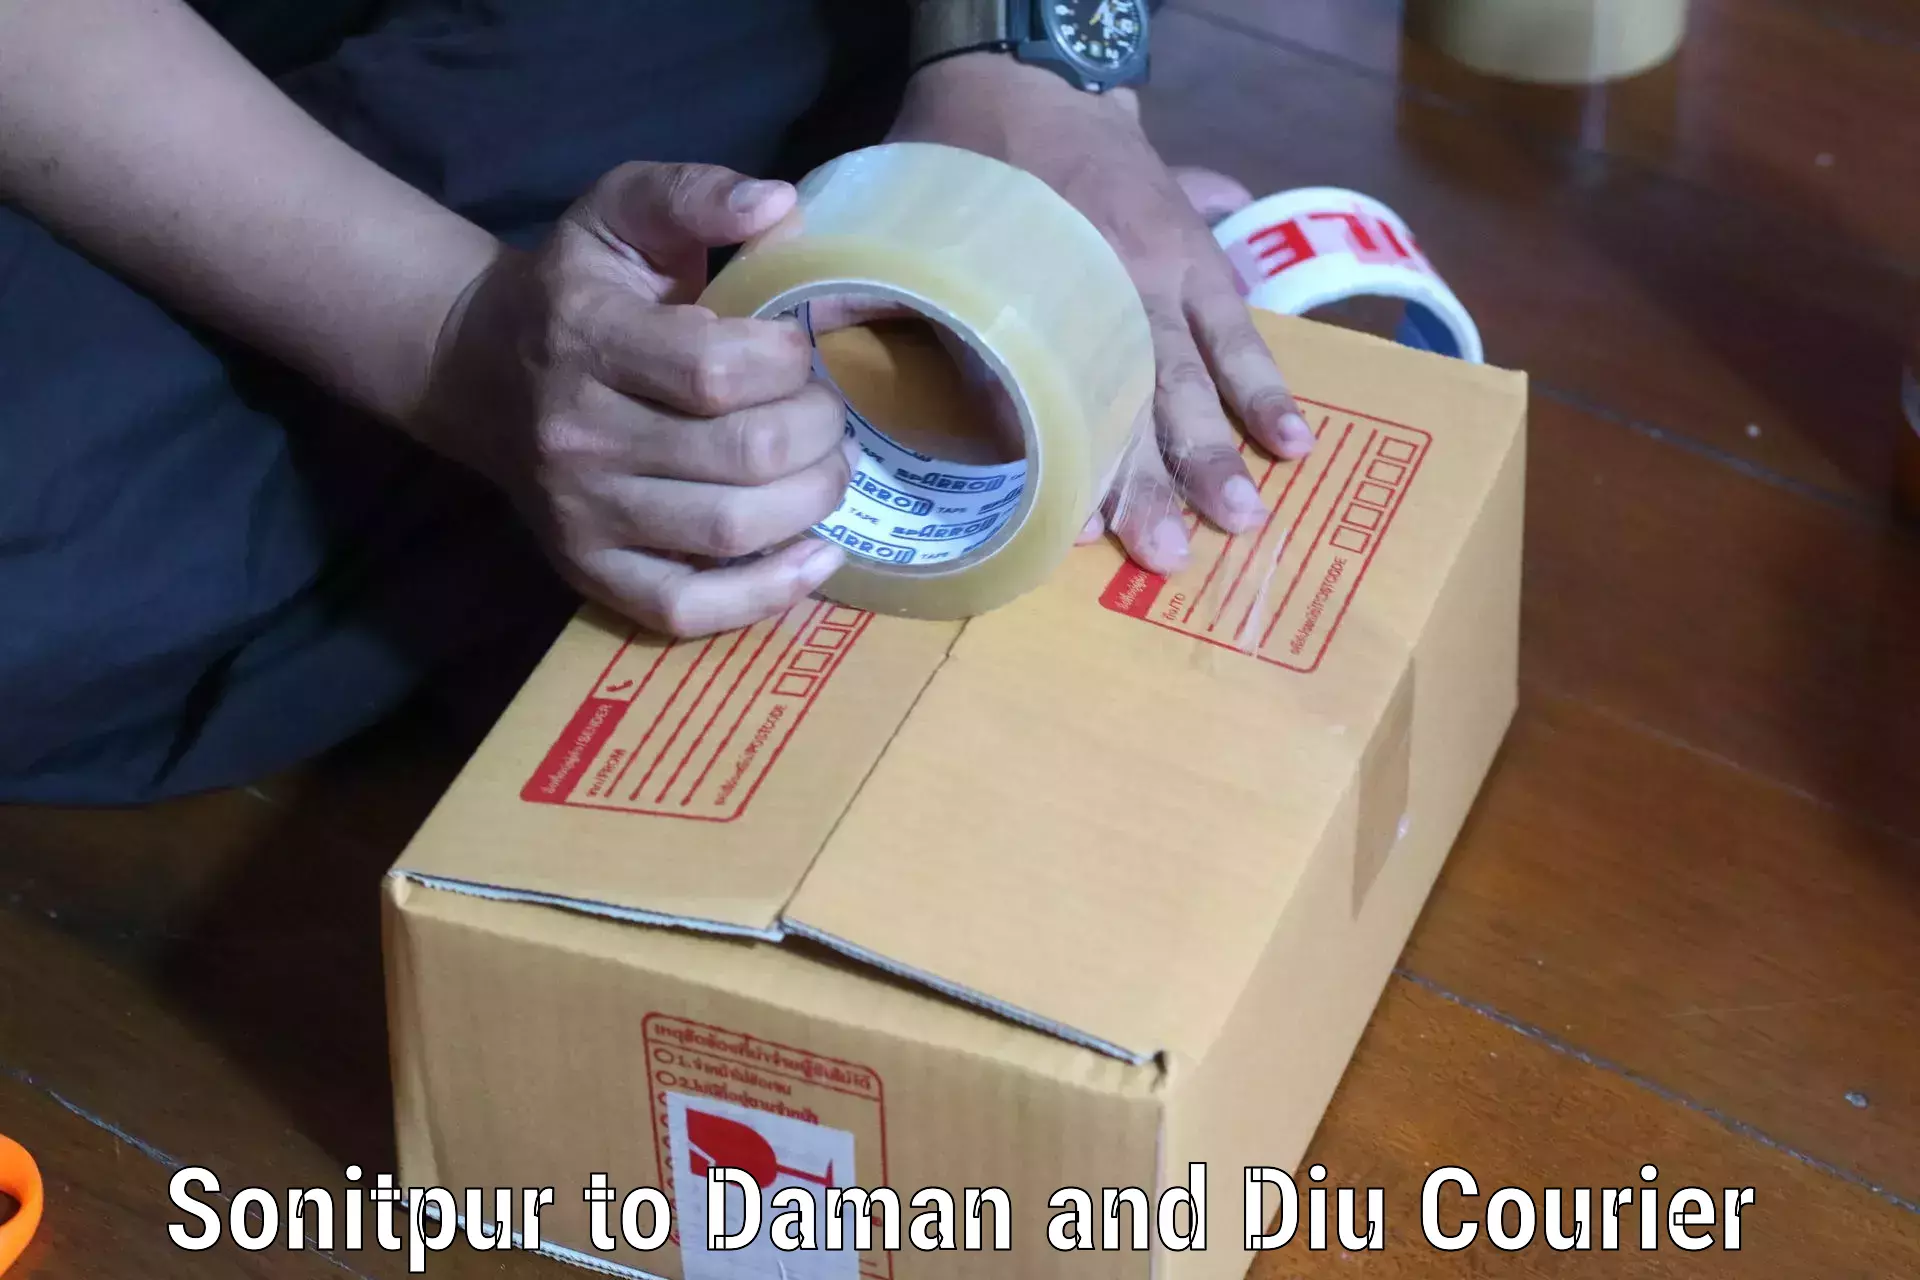 Subscription-based courier Sonitpur to Daman